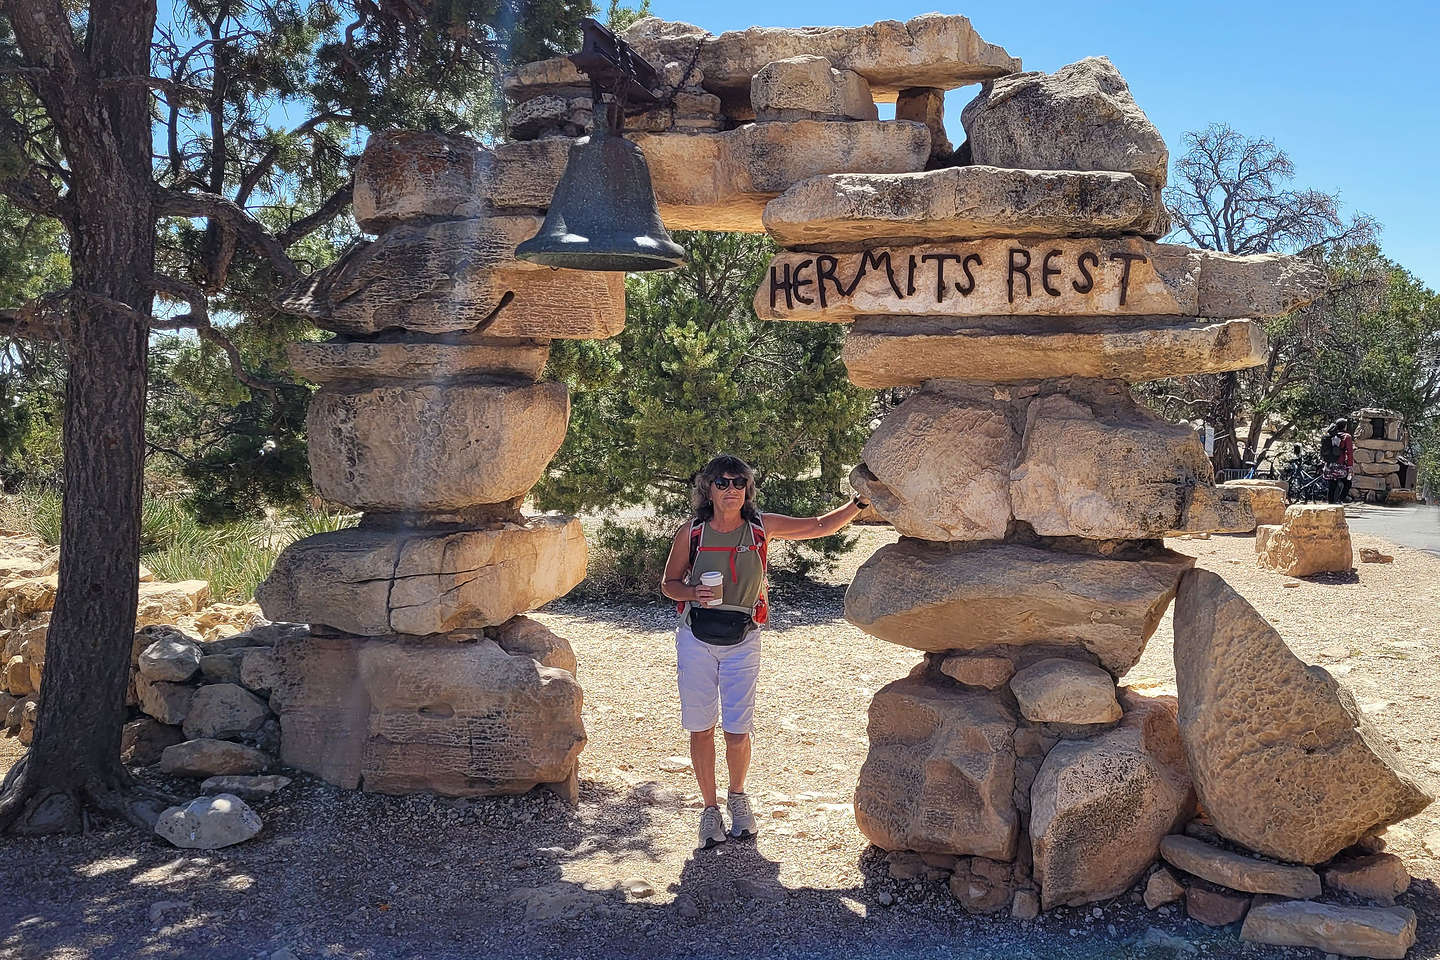 Start of the hike from Hermit's Rest